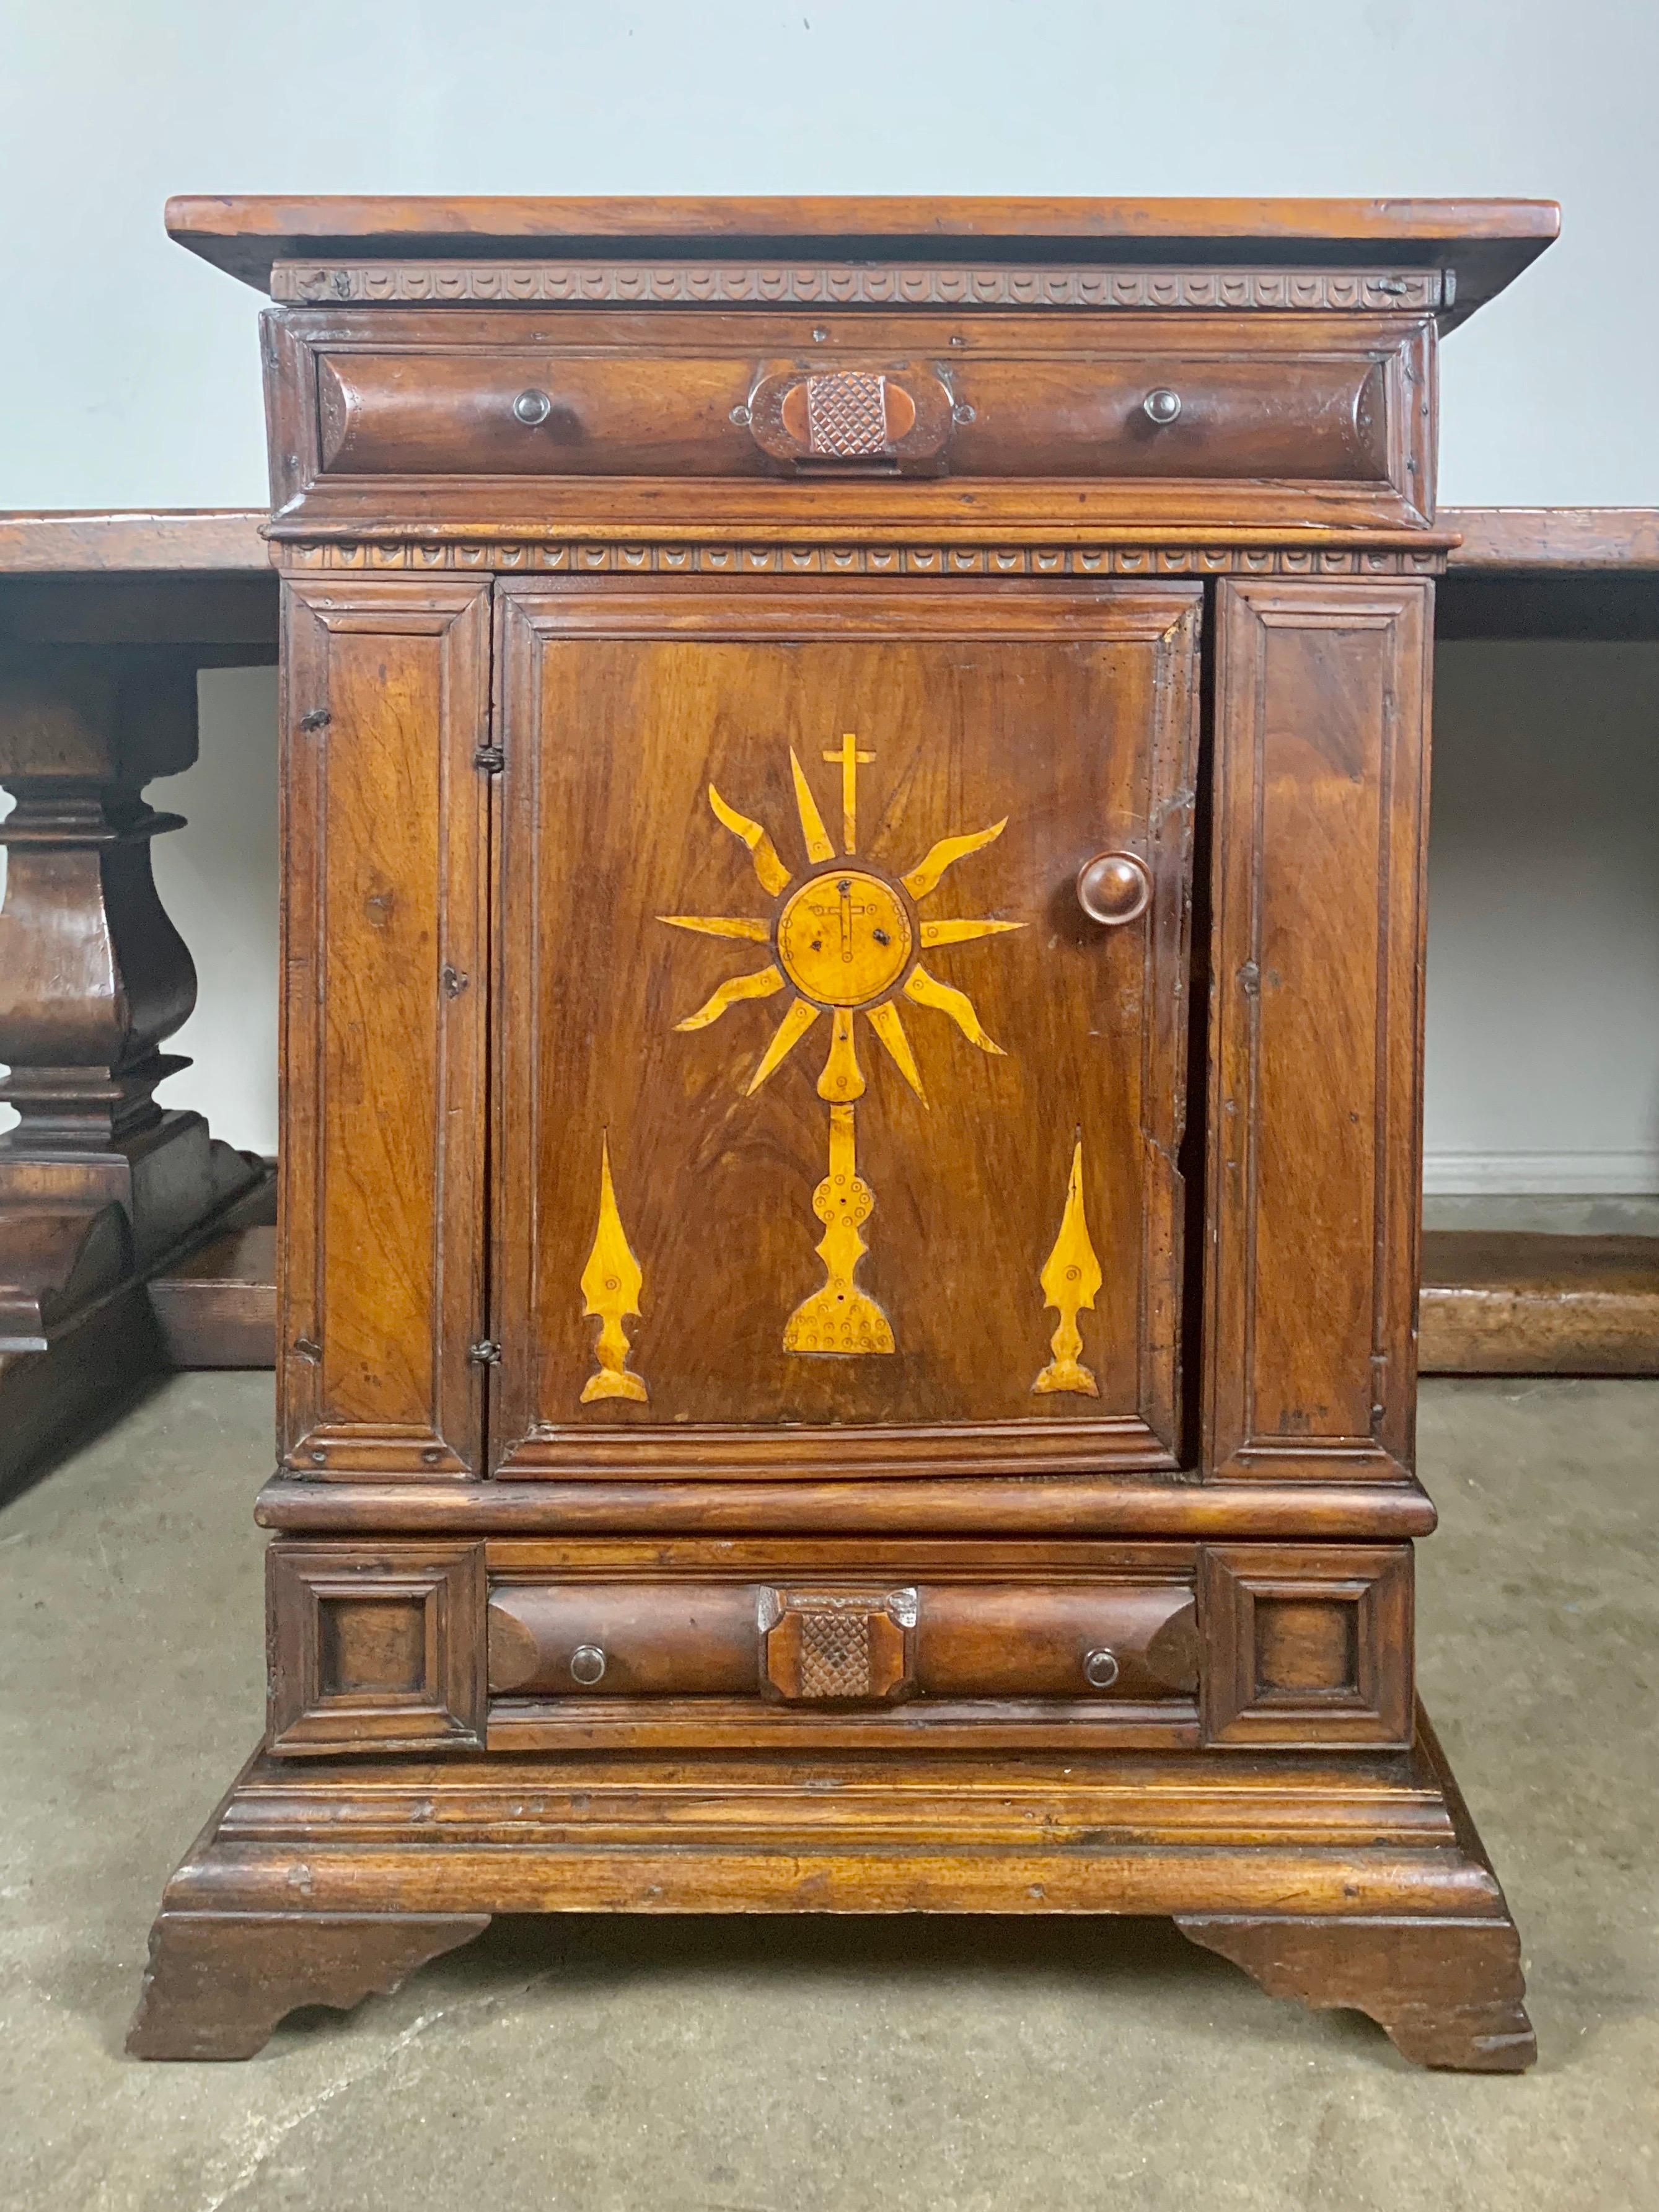 18th century inlaid Italian walnut credenza with maple inlay depicting various religious icons. There are two drawers, one towards the top and one on the bottom. There is a door that opens to more storage behind.